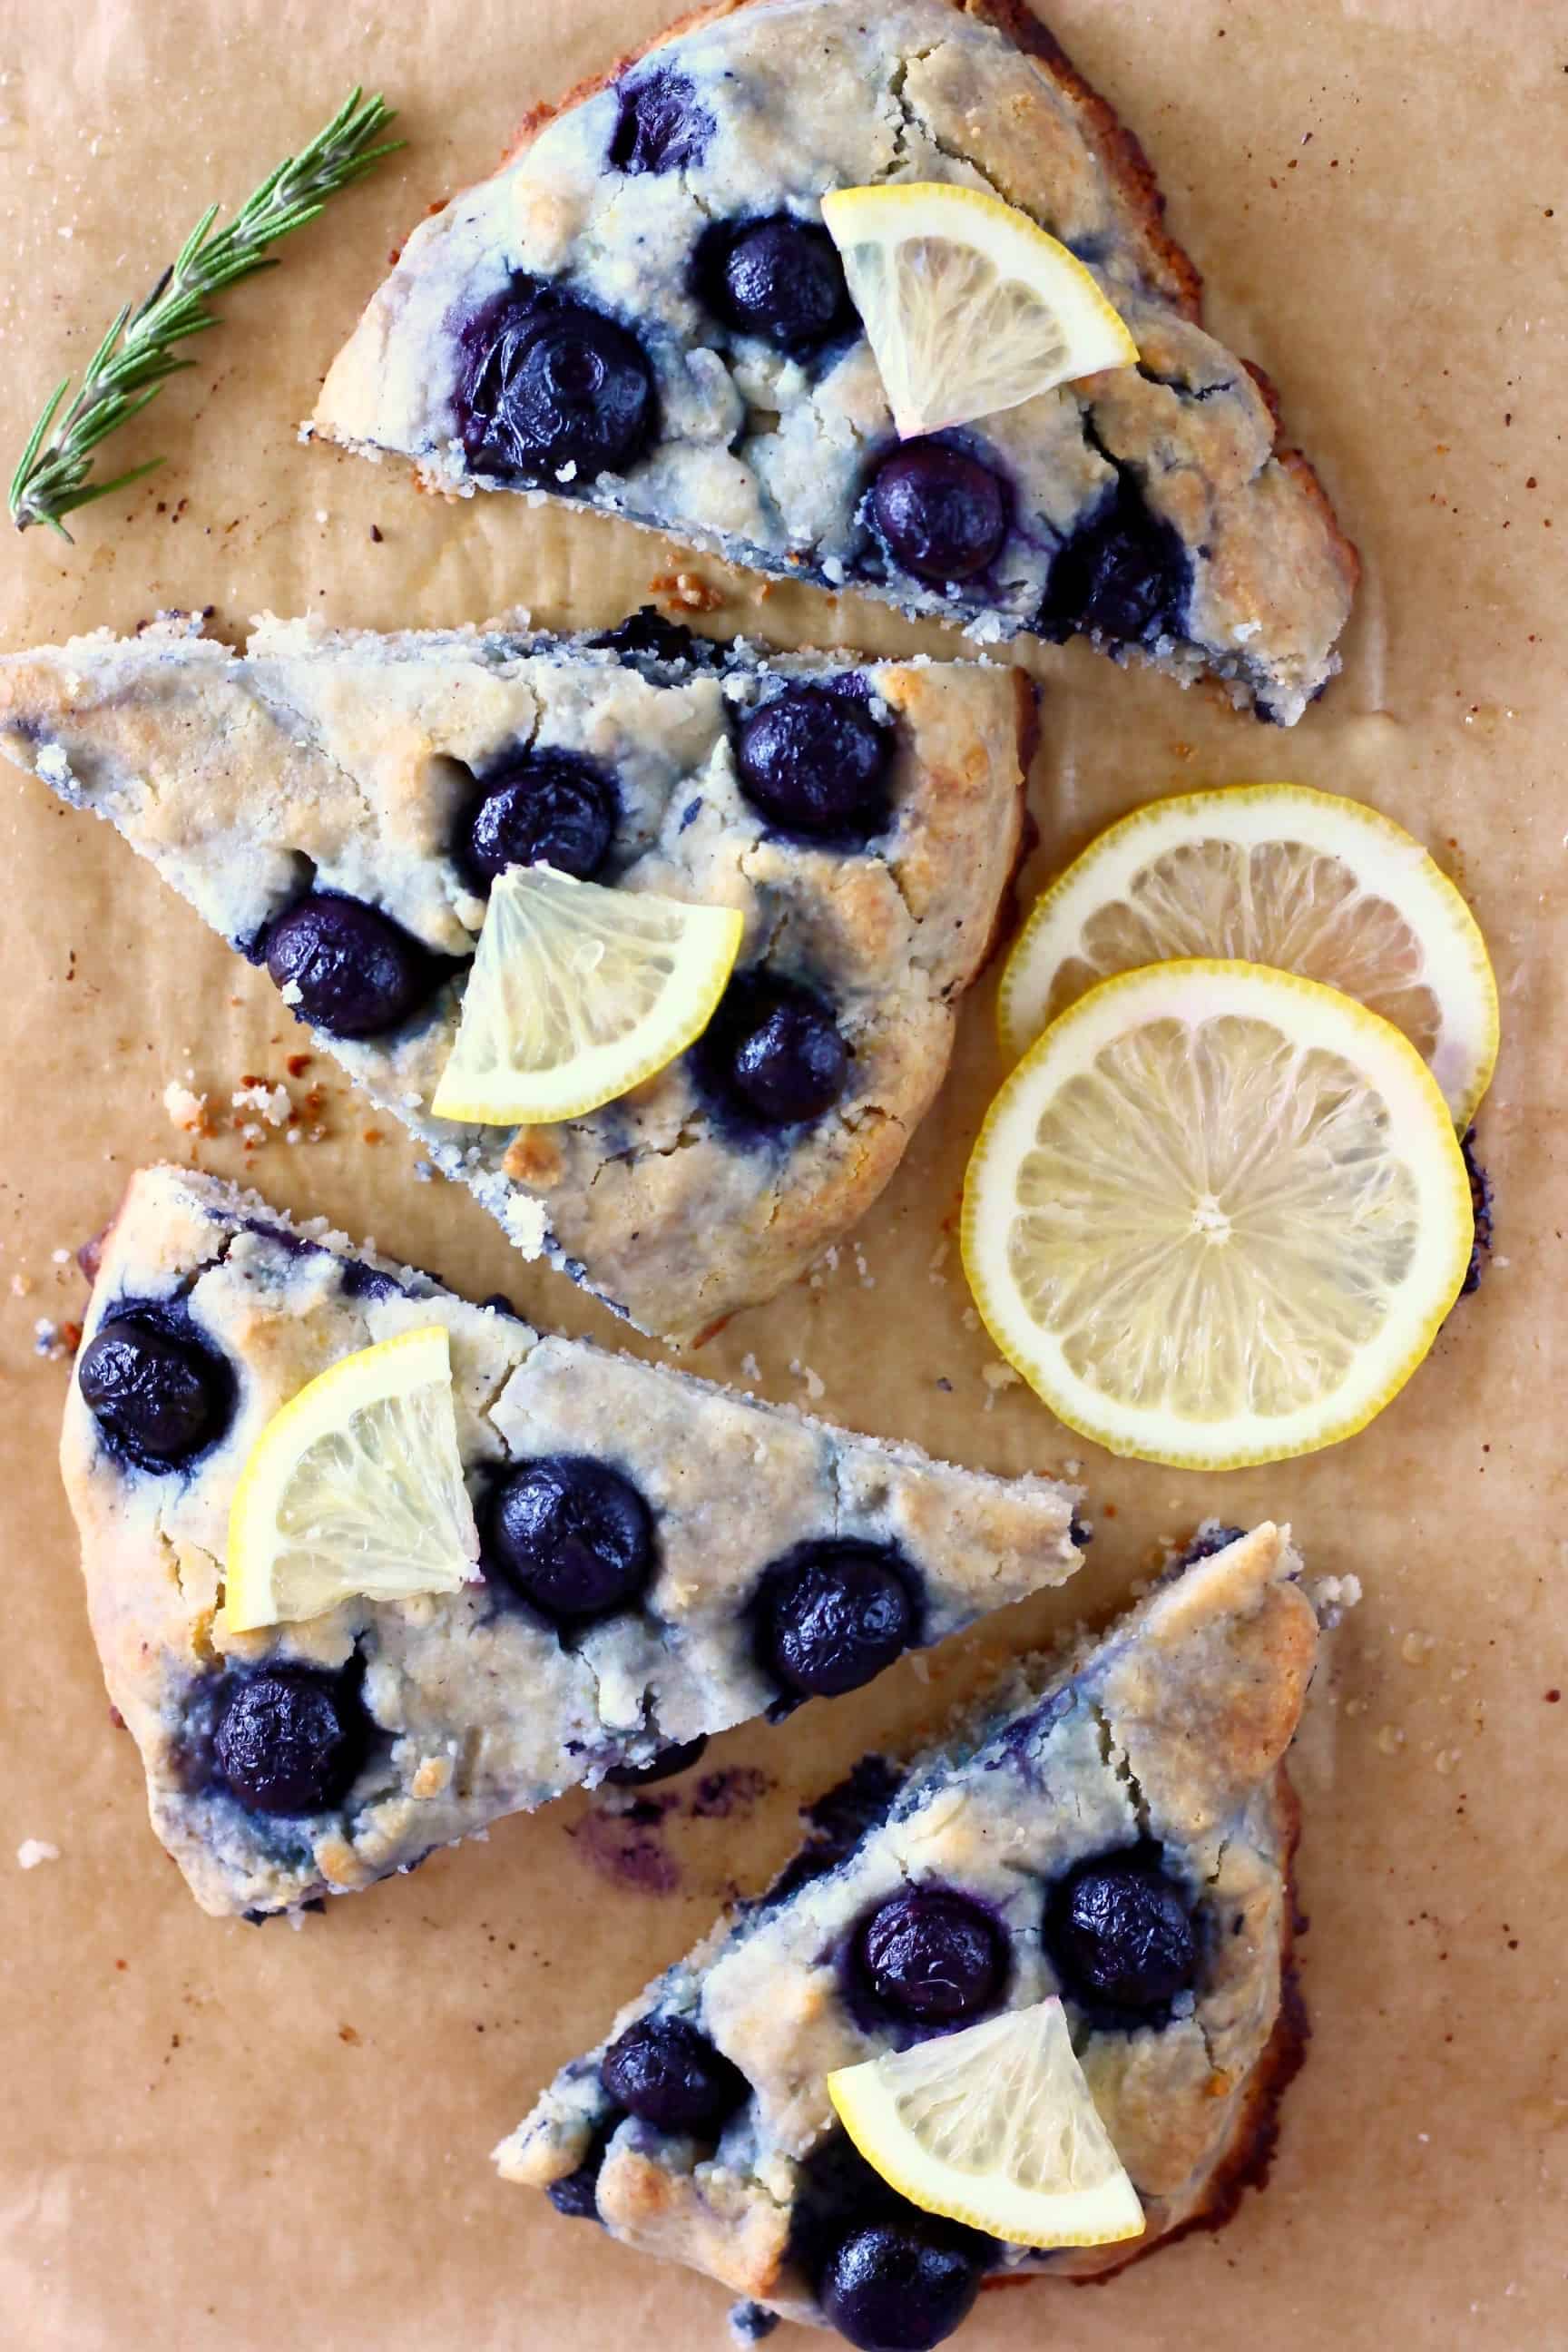 Photo of four triangular blueberry scones topped with lemon wedges on a sheet of brown baking paper